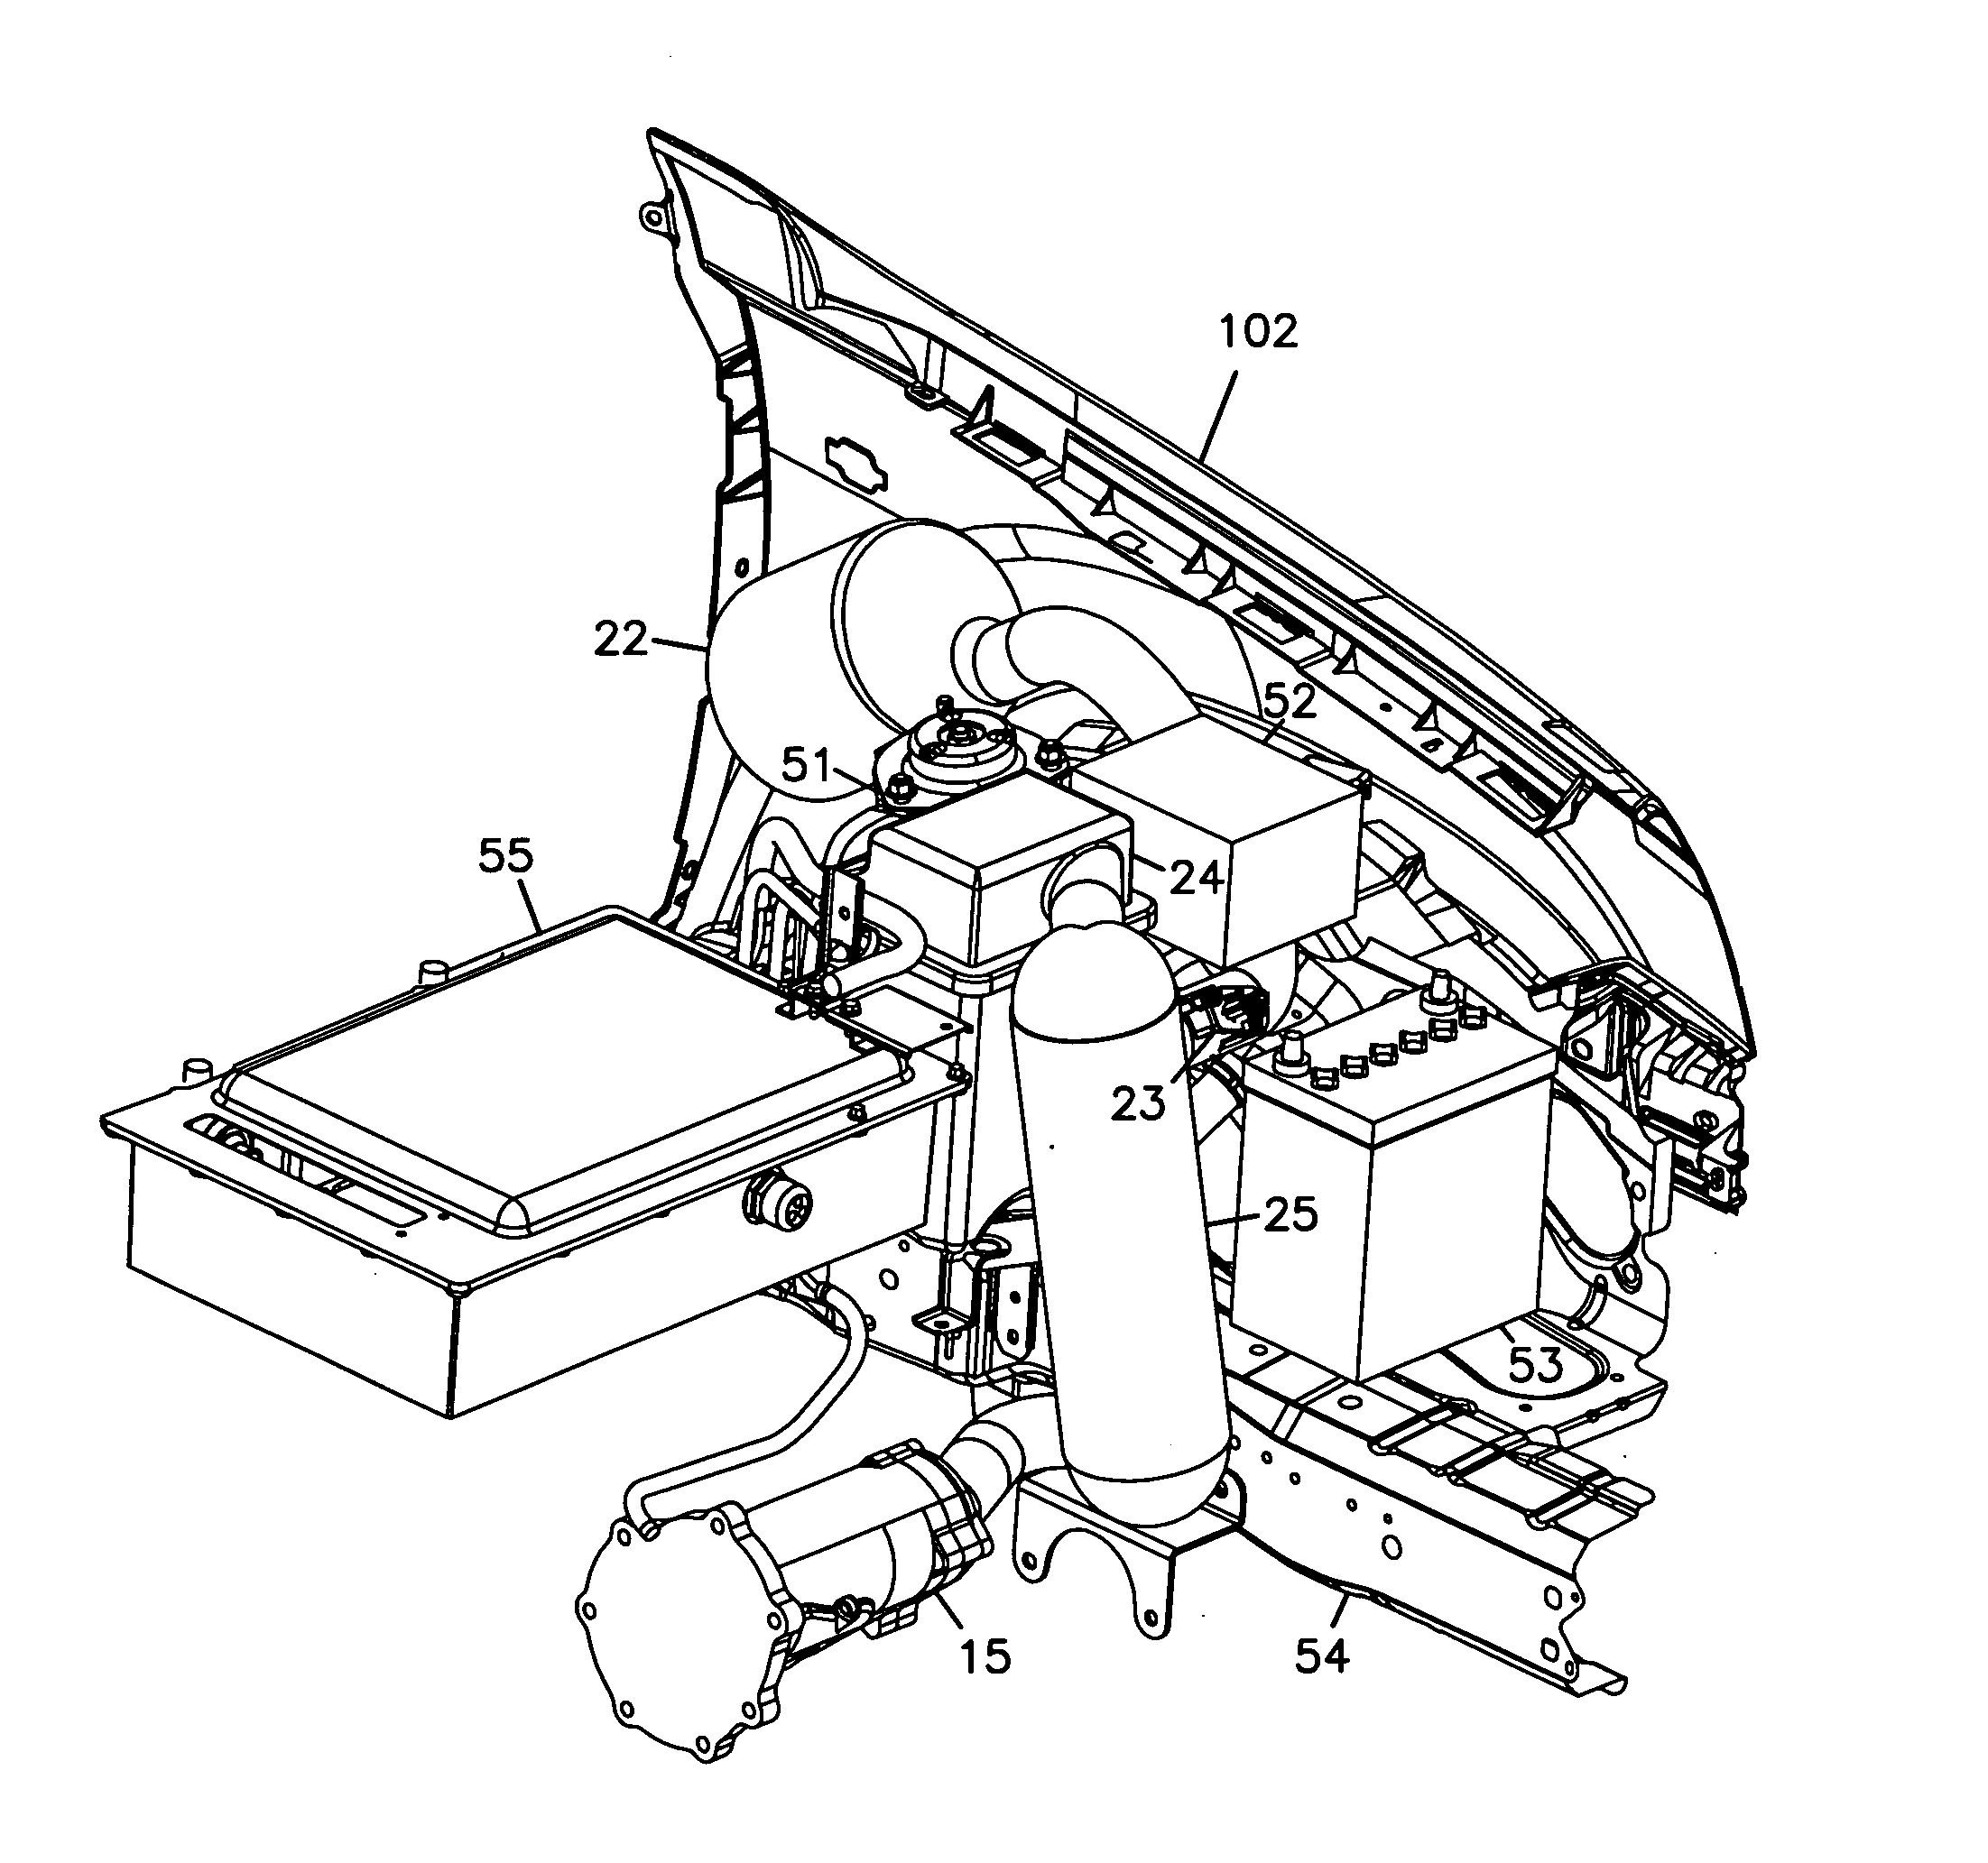 Air filtration system for fuel cell systems